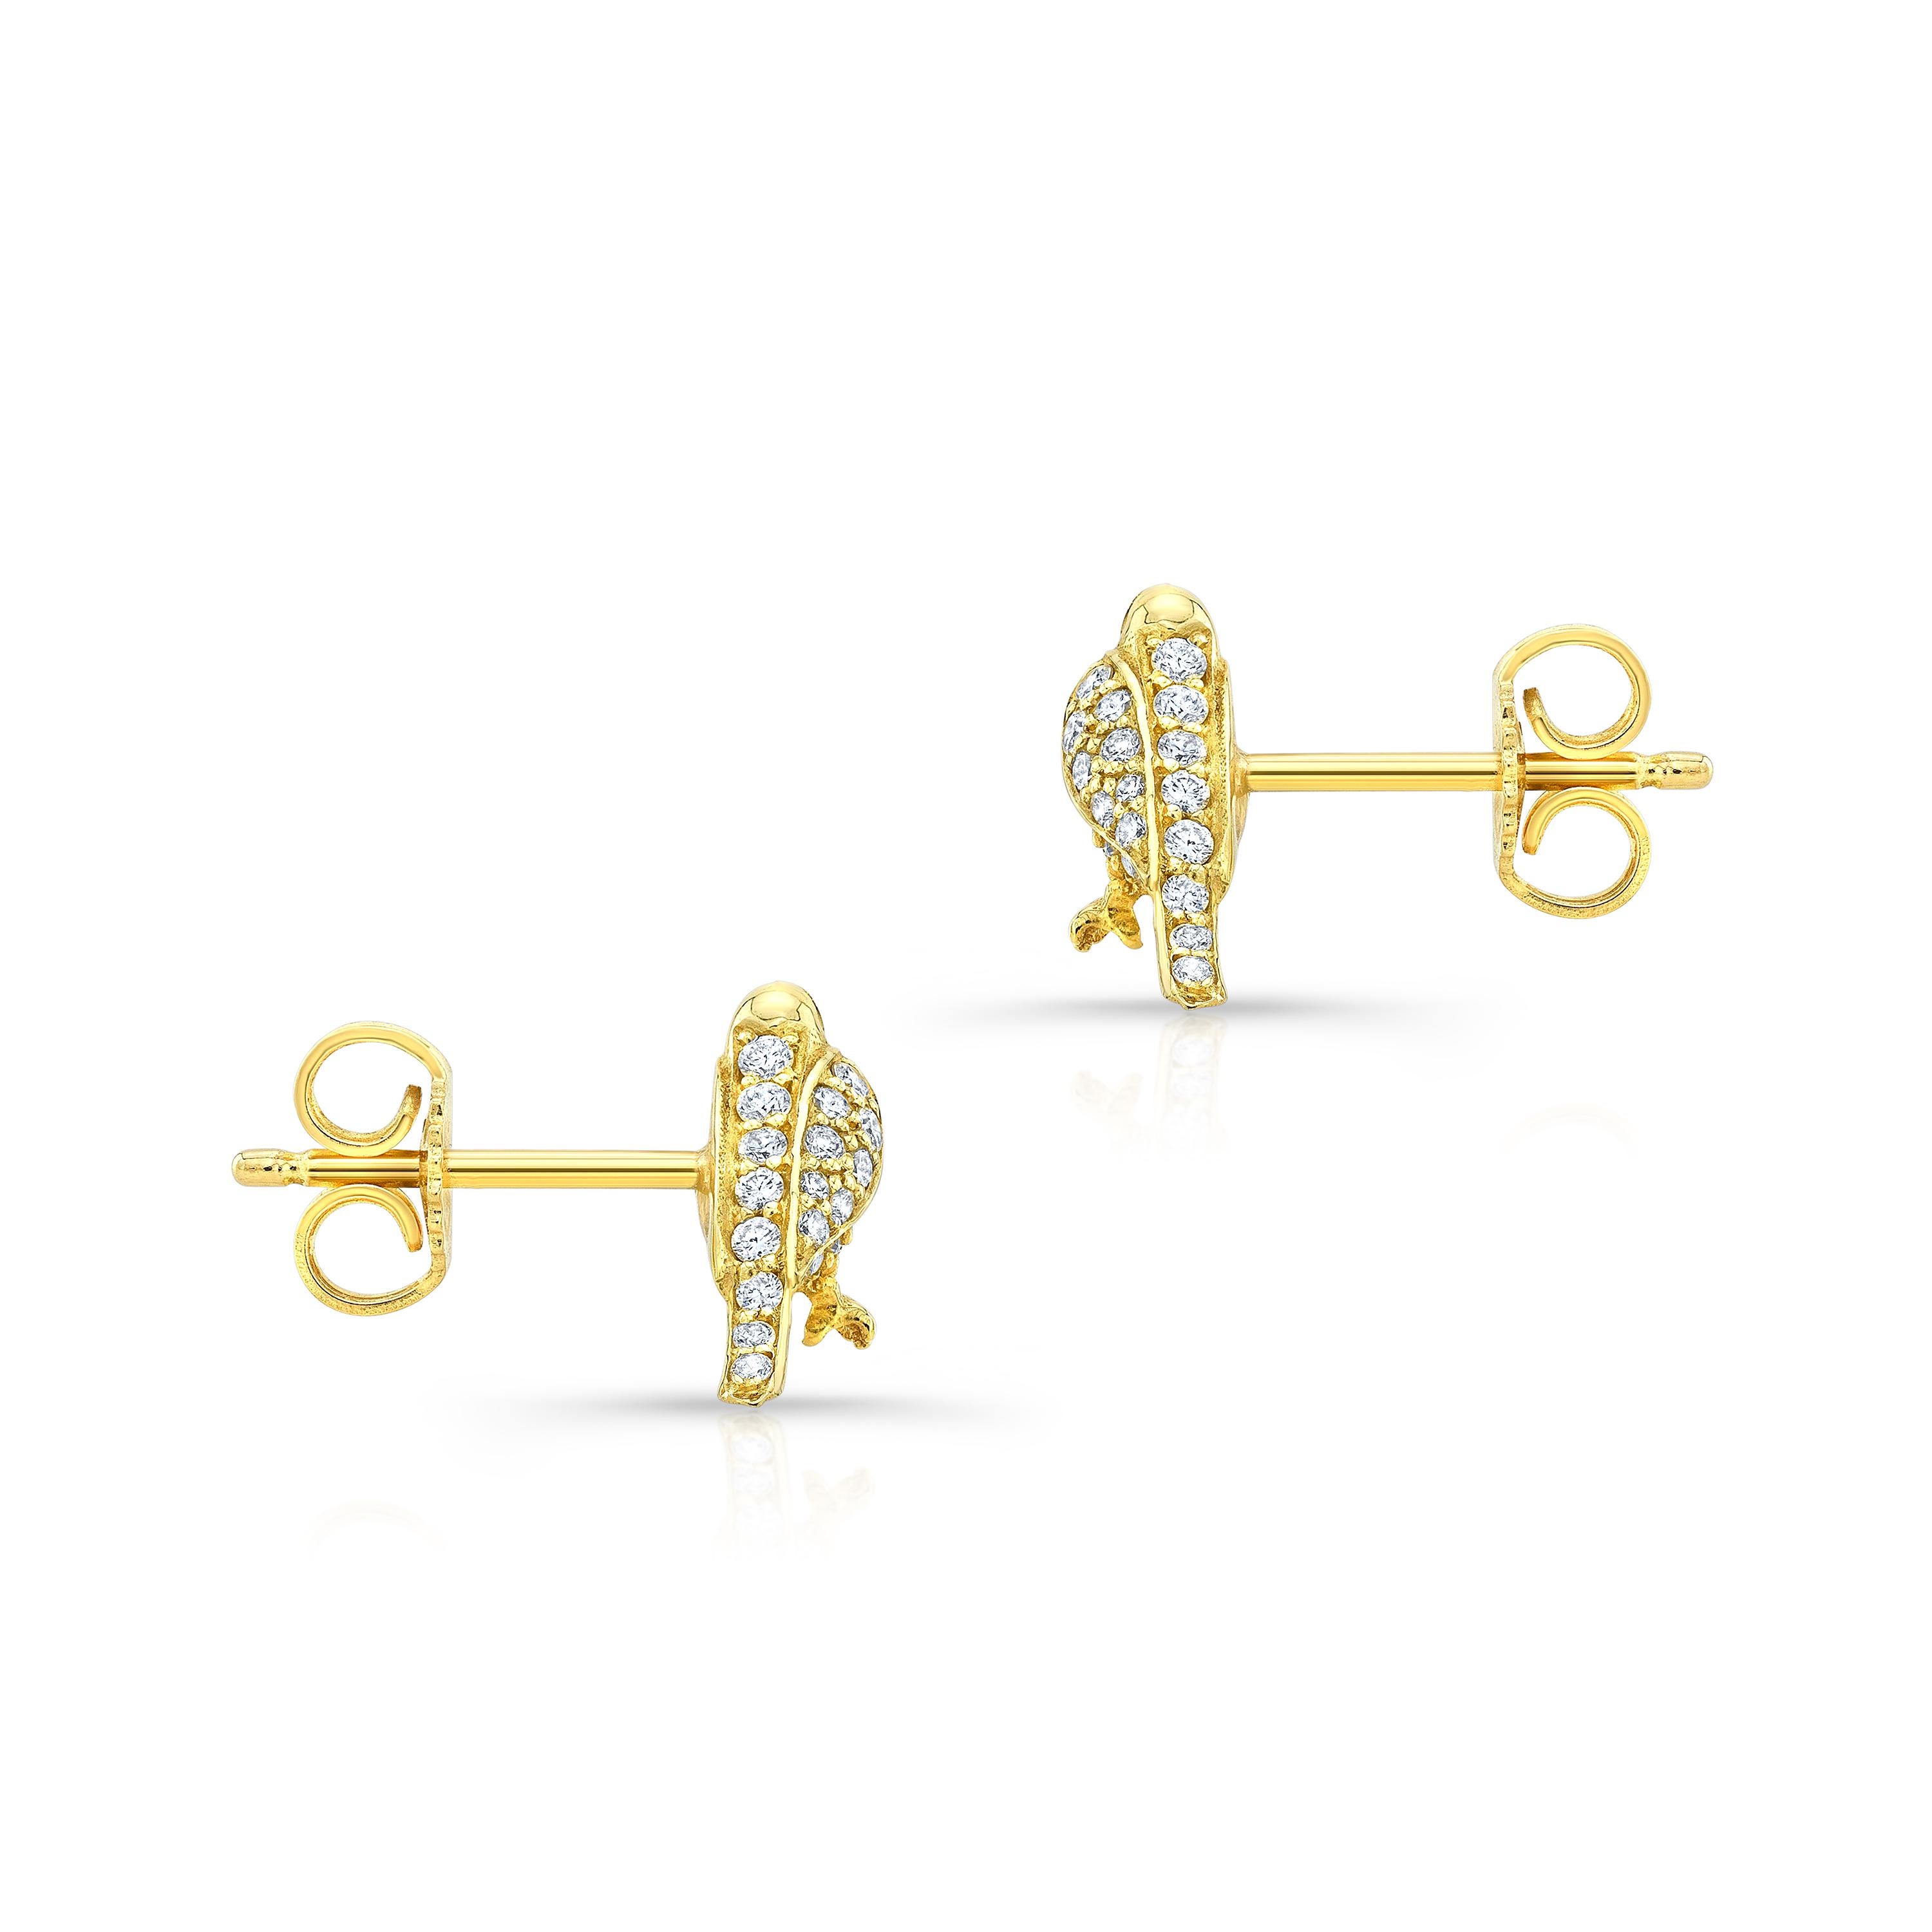 Amy Y's design in 18K-yellow gold and diamond inlaid sweet lovebird earrings are a wonderful example of enchantment to go with every occasion. Handcrafted by Amy's skilled European artisan, these charming little lovebirds are delicately detailed